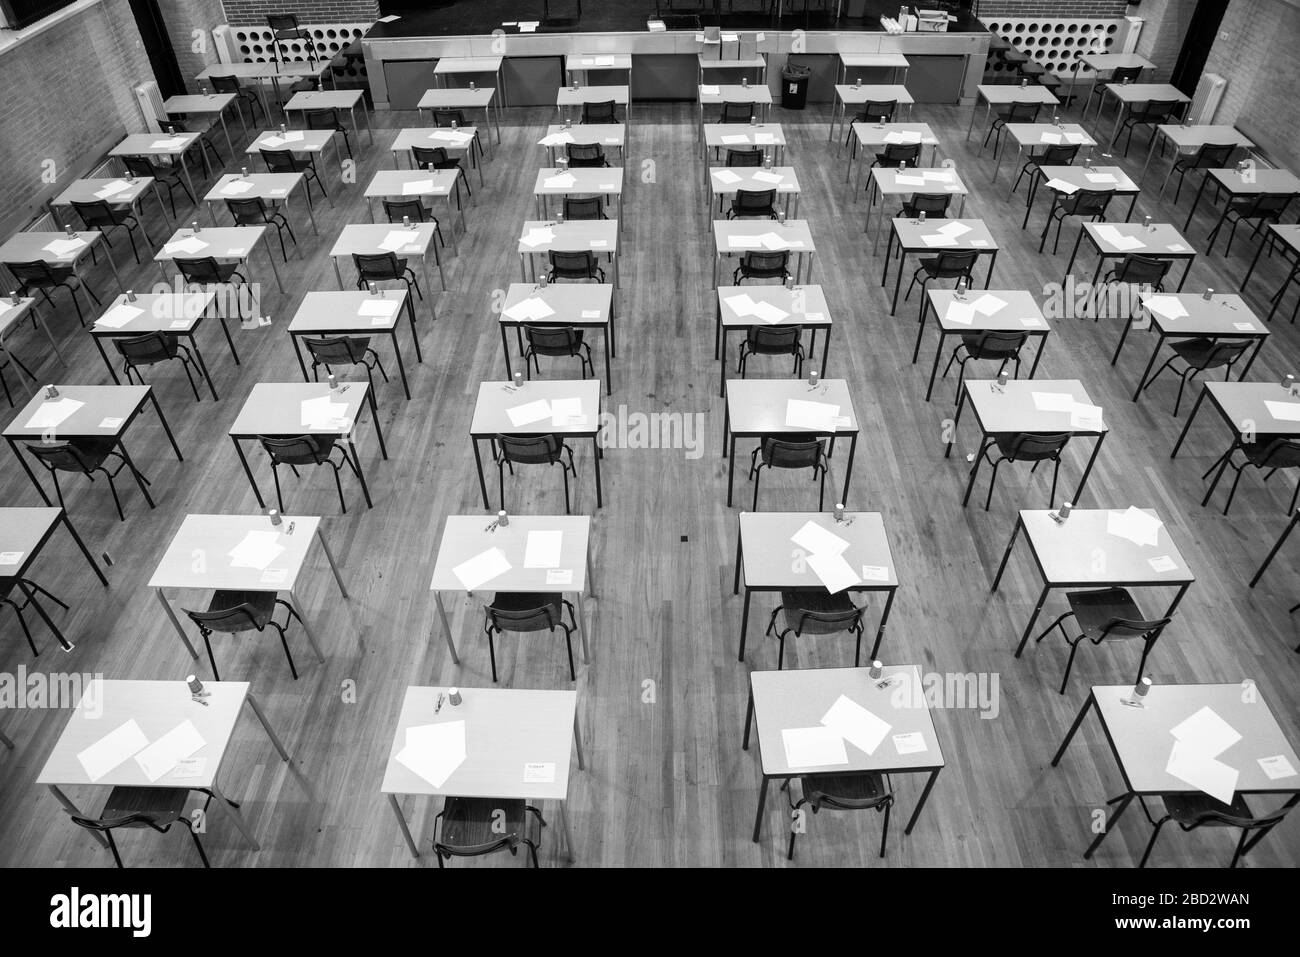 rows of empty tables and chairs in exam room at highschool in black and white Stock Photo